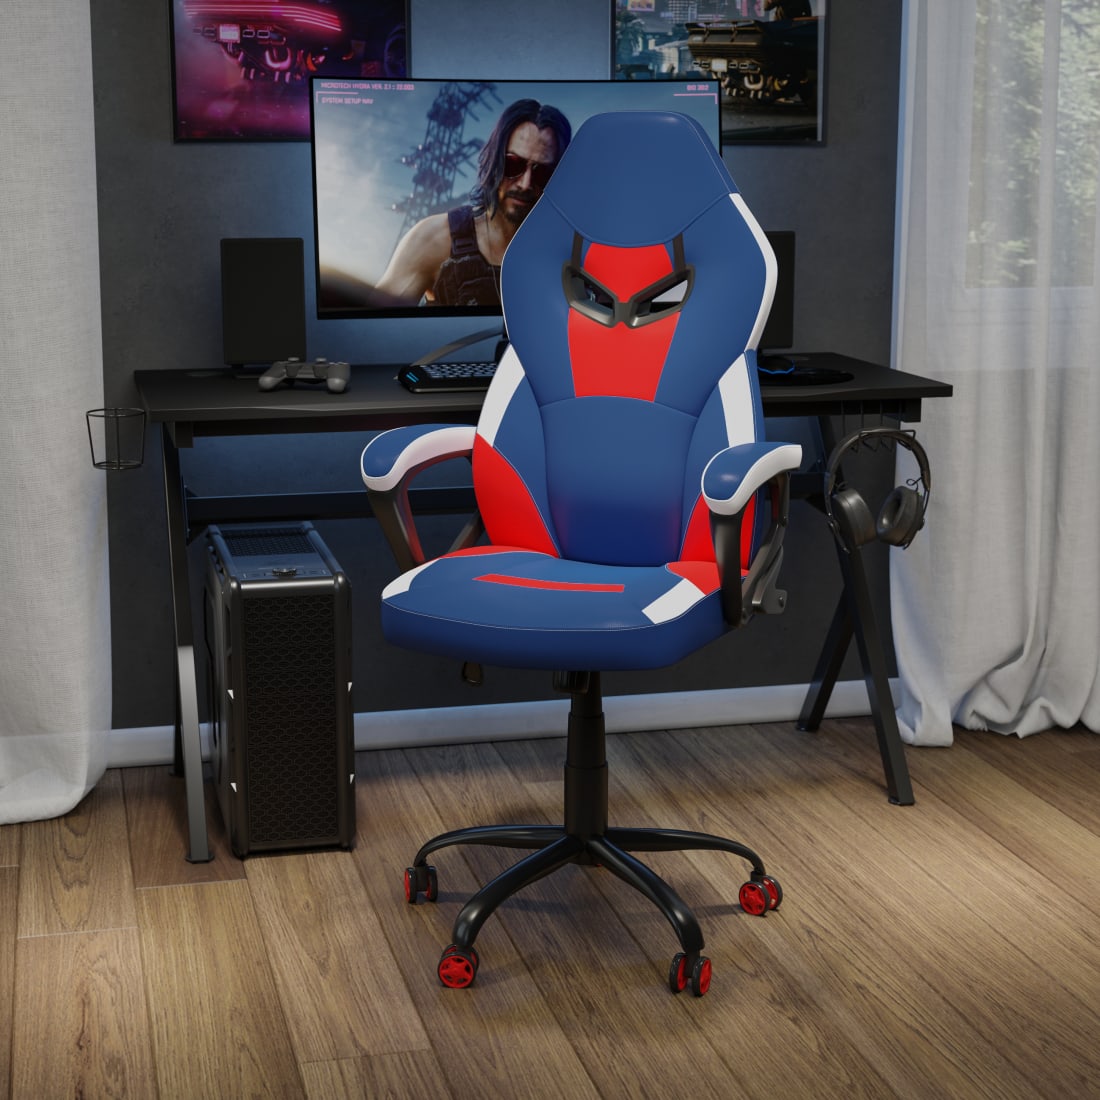 Ergonomic PC  Computer Chair - Adjustable Red & Blue Designer Gaming Chair - 360° Swivel - Red Dual Wheel Casters